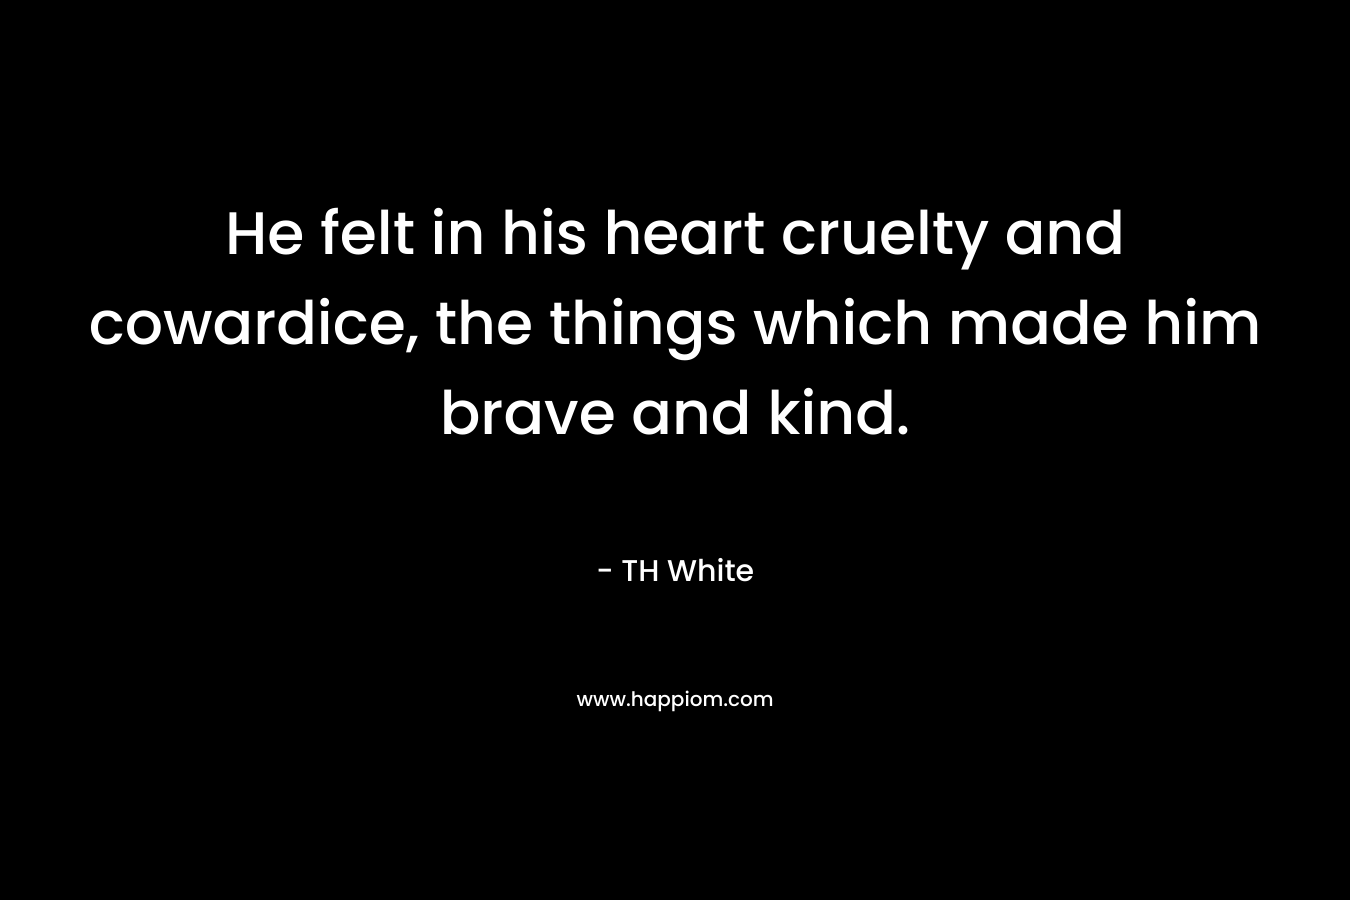 He felt in his heart cruelty and cowardice, the things which made him brave and kind. – TH White